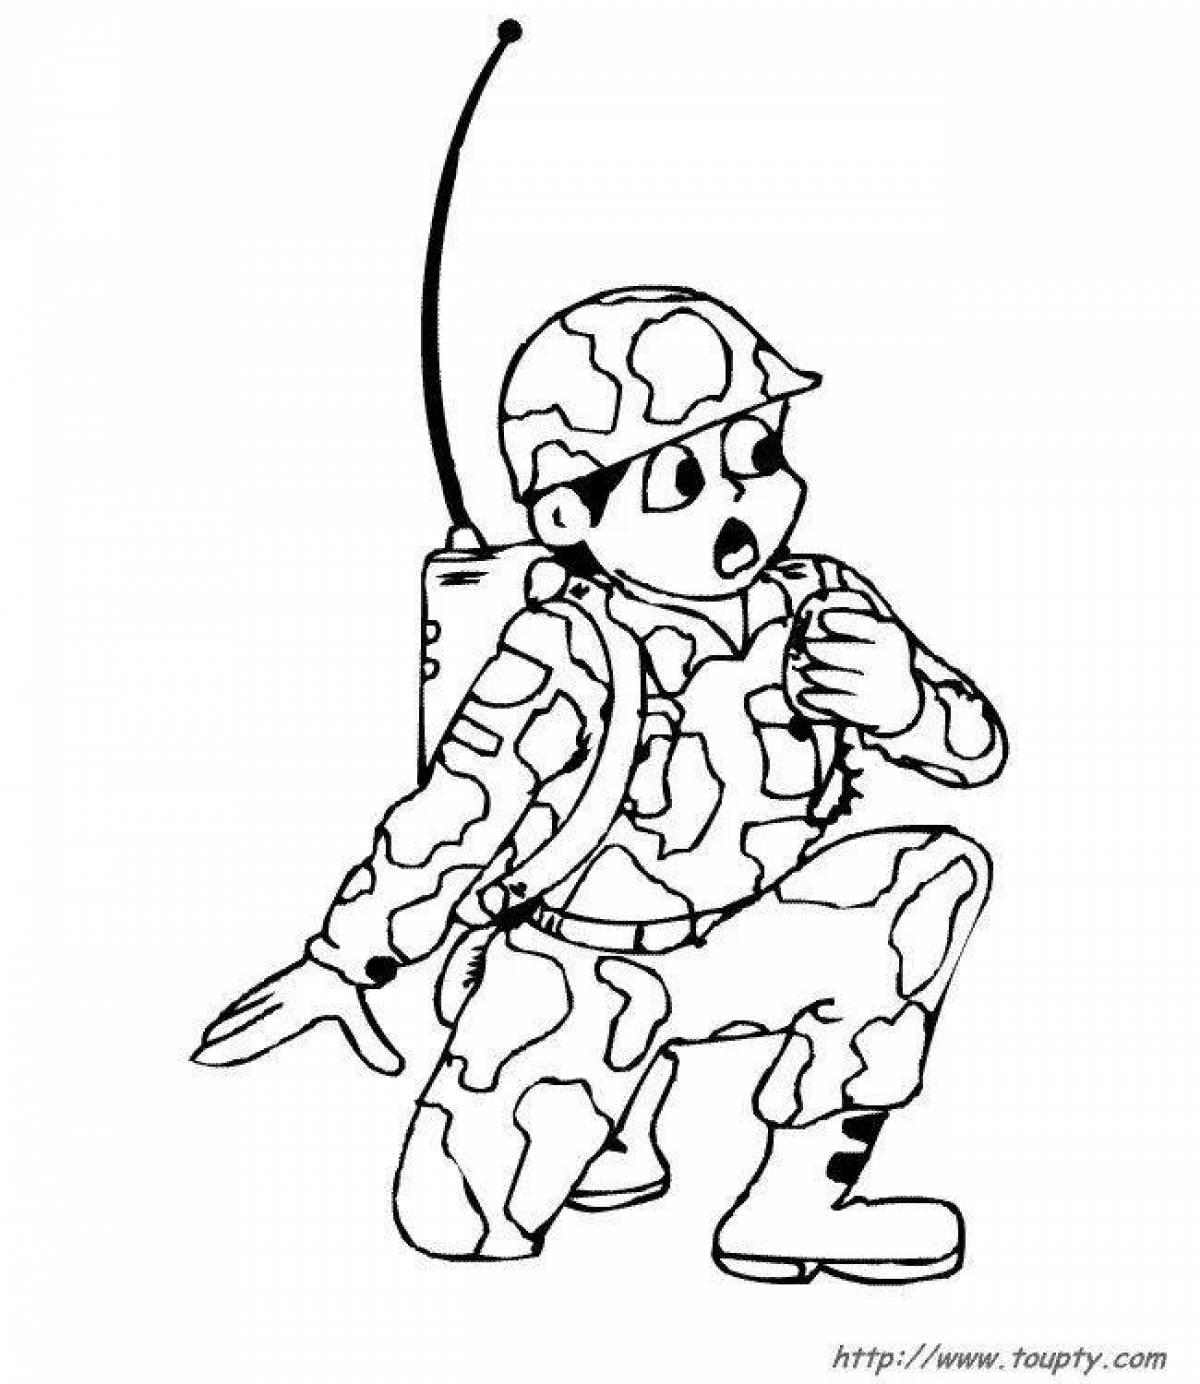 Charming soldier coloring book for kids